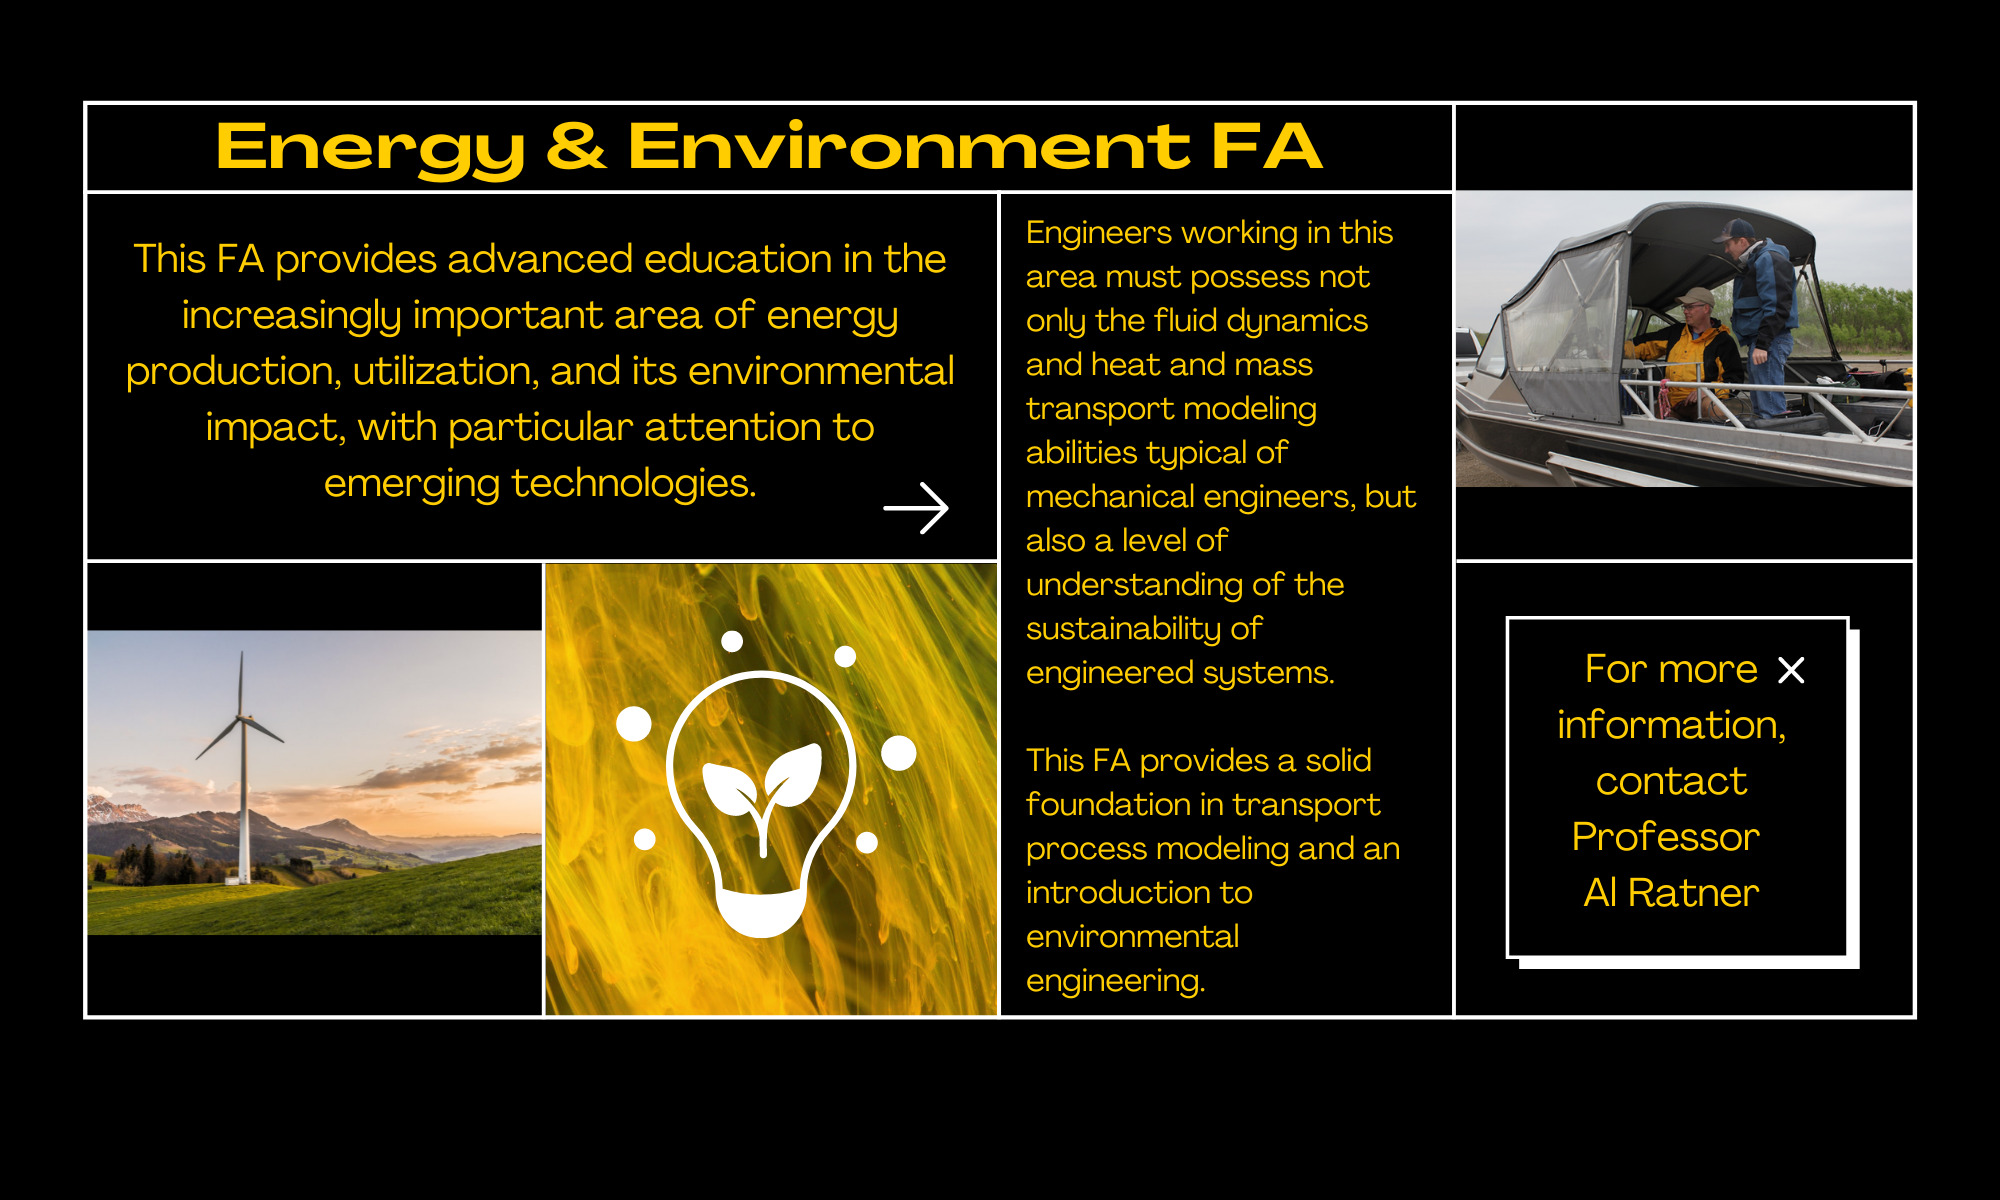 Energy and Environment FA